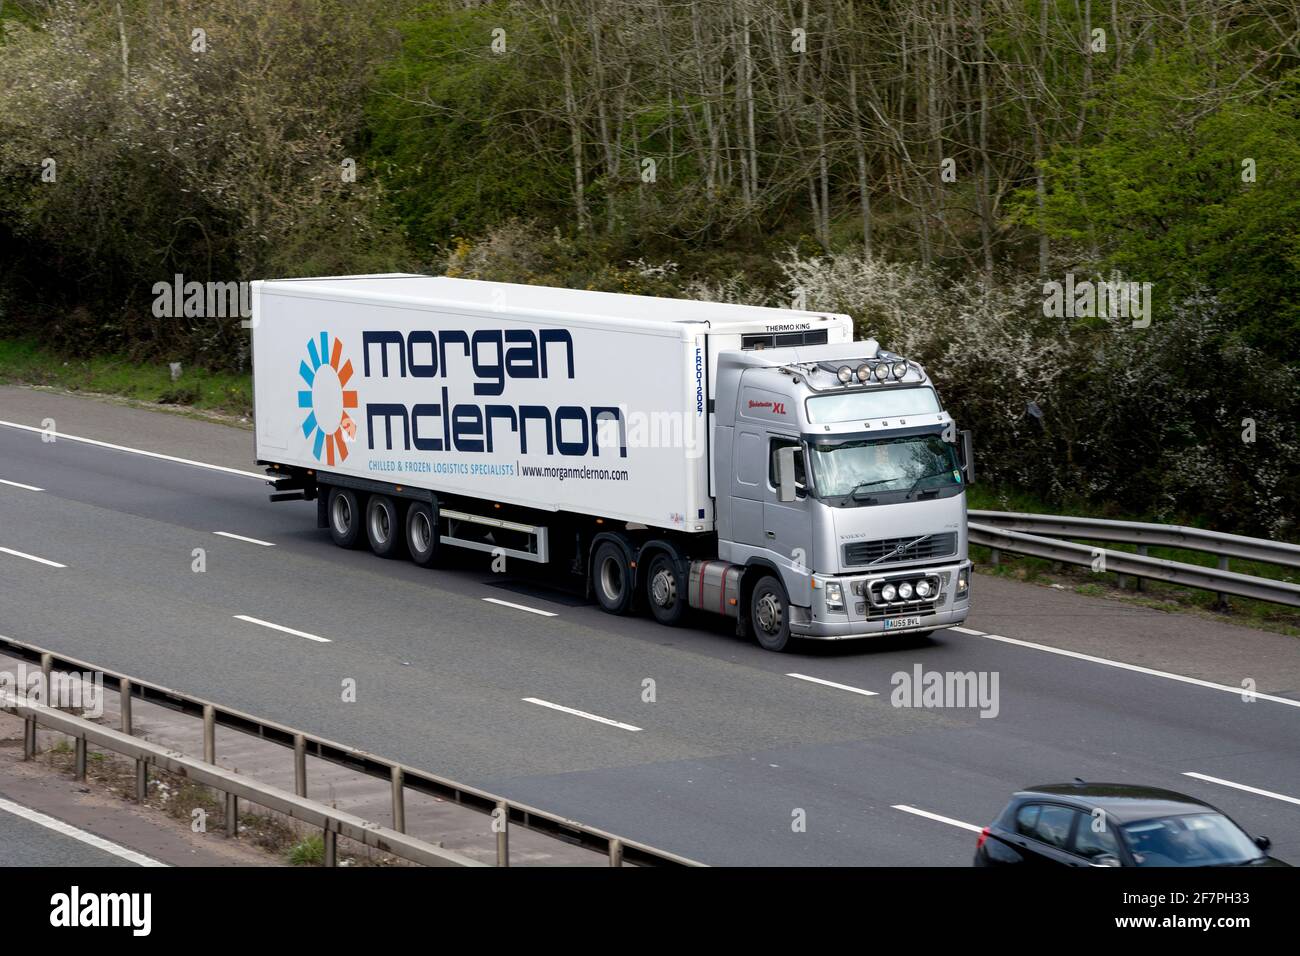 A Volvo Morgan McLernon refrigerated lorry on the M40 motorway, Warwickshire, UK Stock Photo